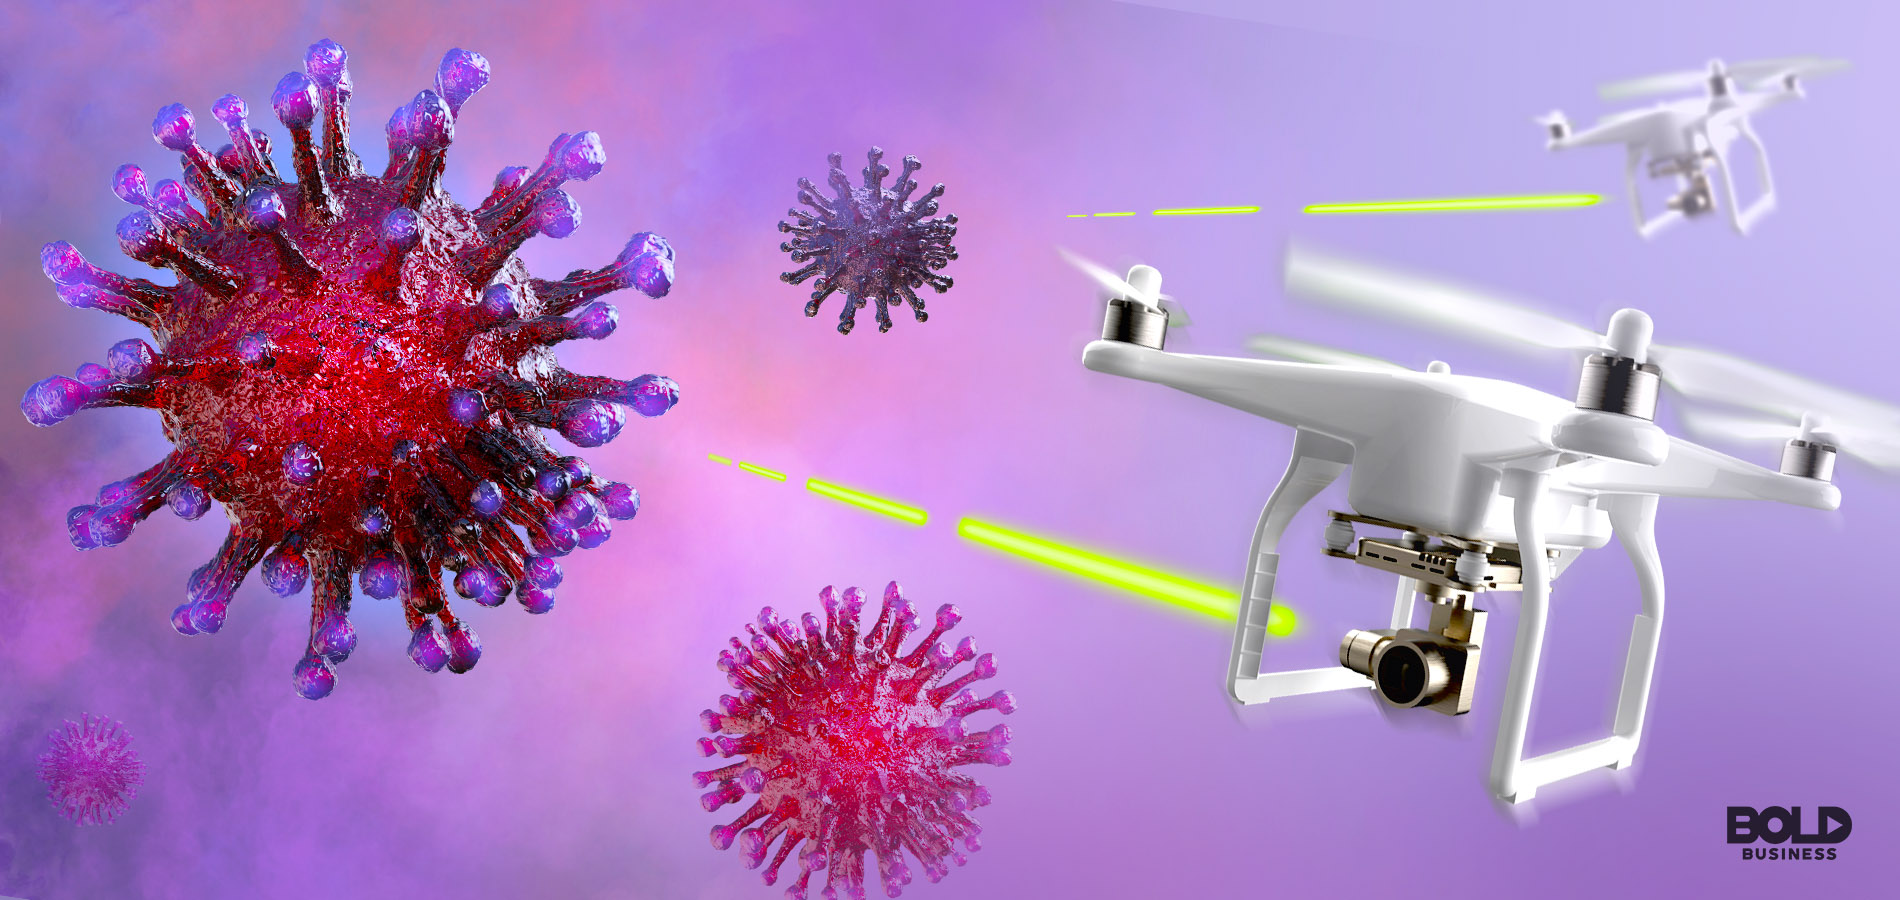 drones firing at a magnified virus in relation to the use of drone technology in fighting the coronavirus infection